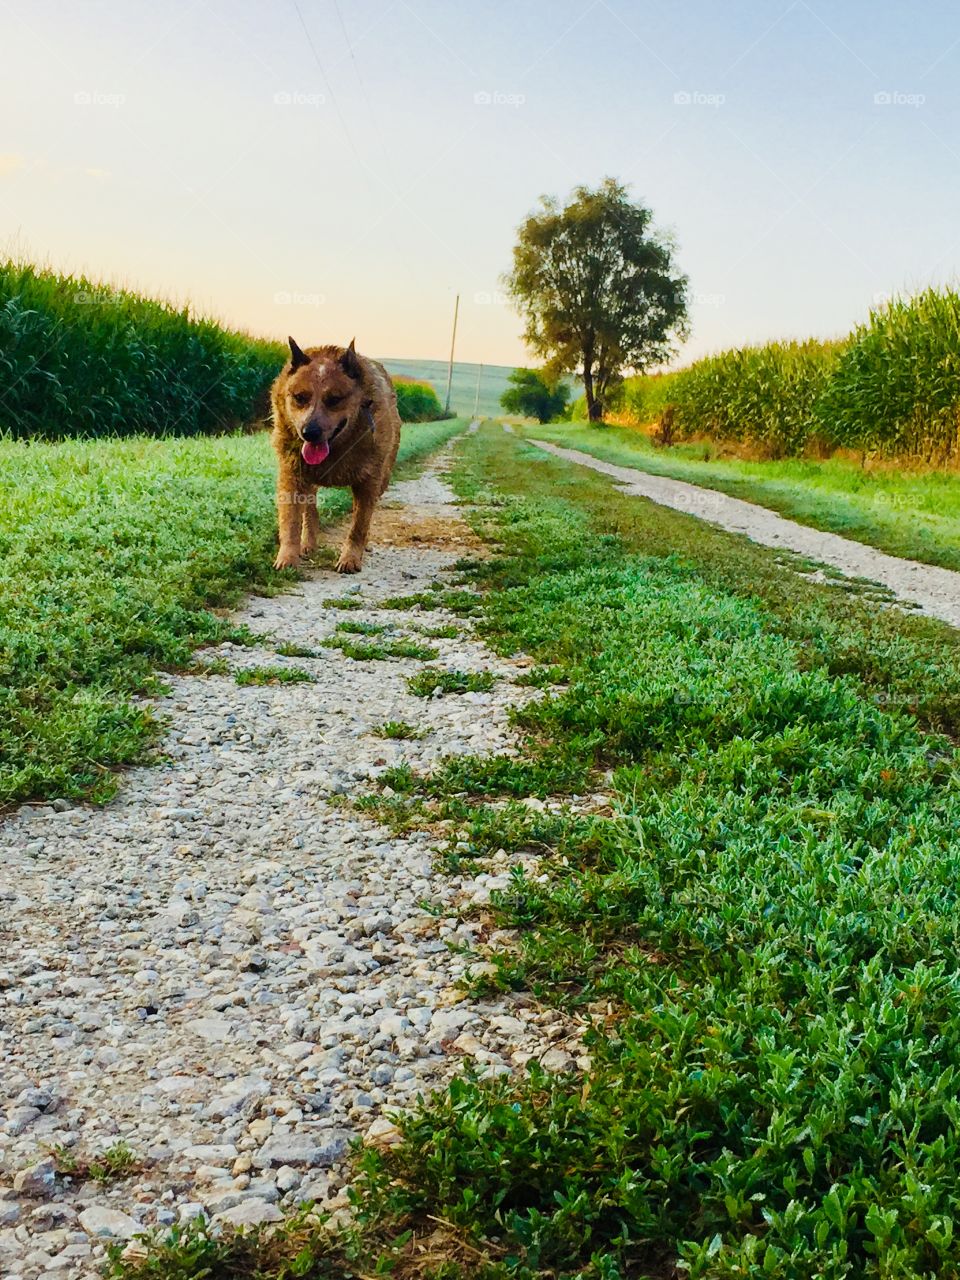 Low-level view of an Australian Cattle Dog / Red Heeler walking down a country lane with lush grass and cornfields on either side